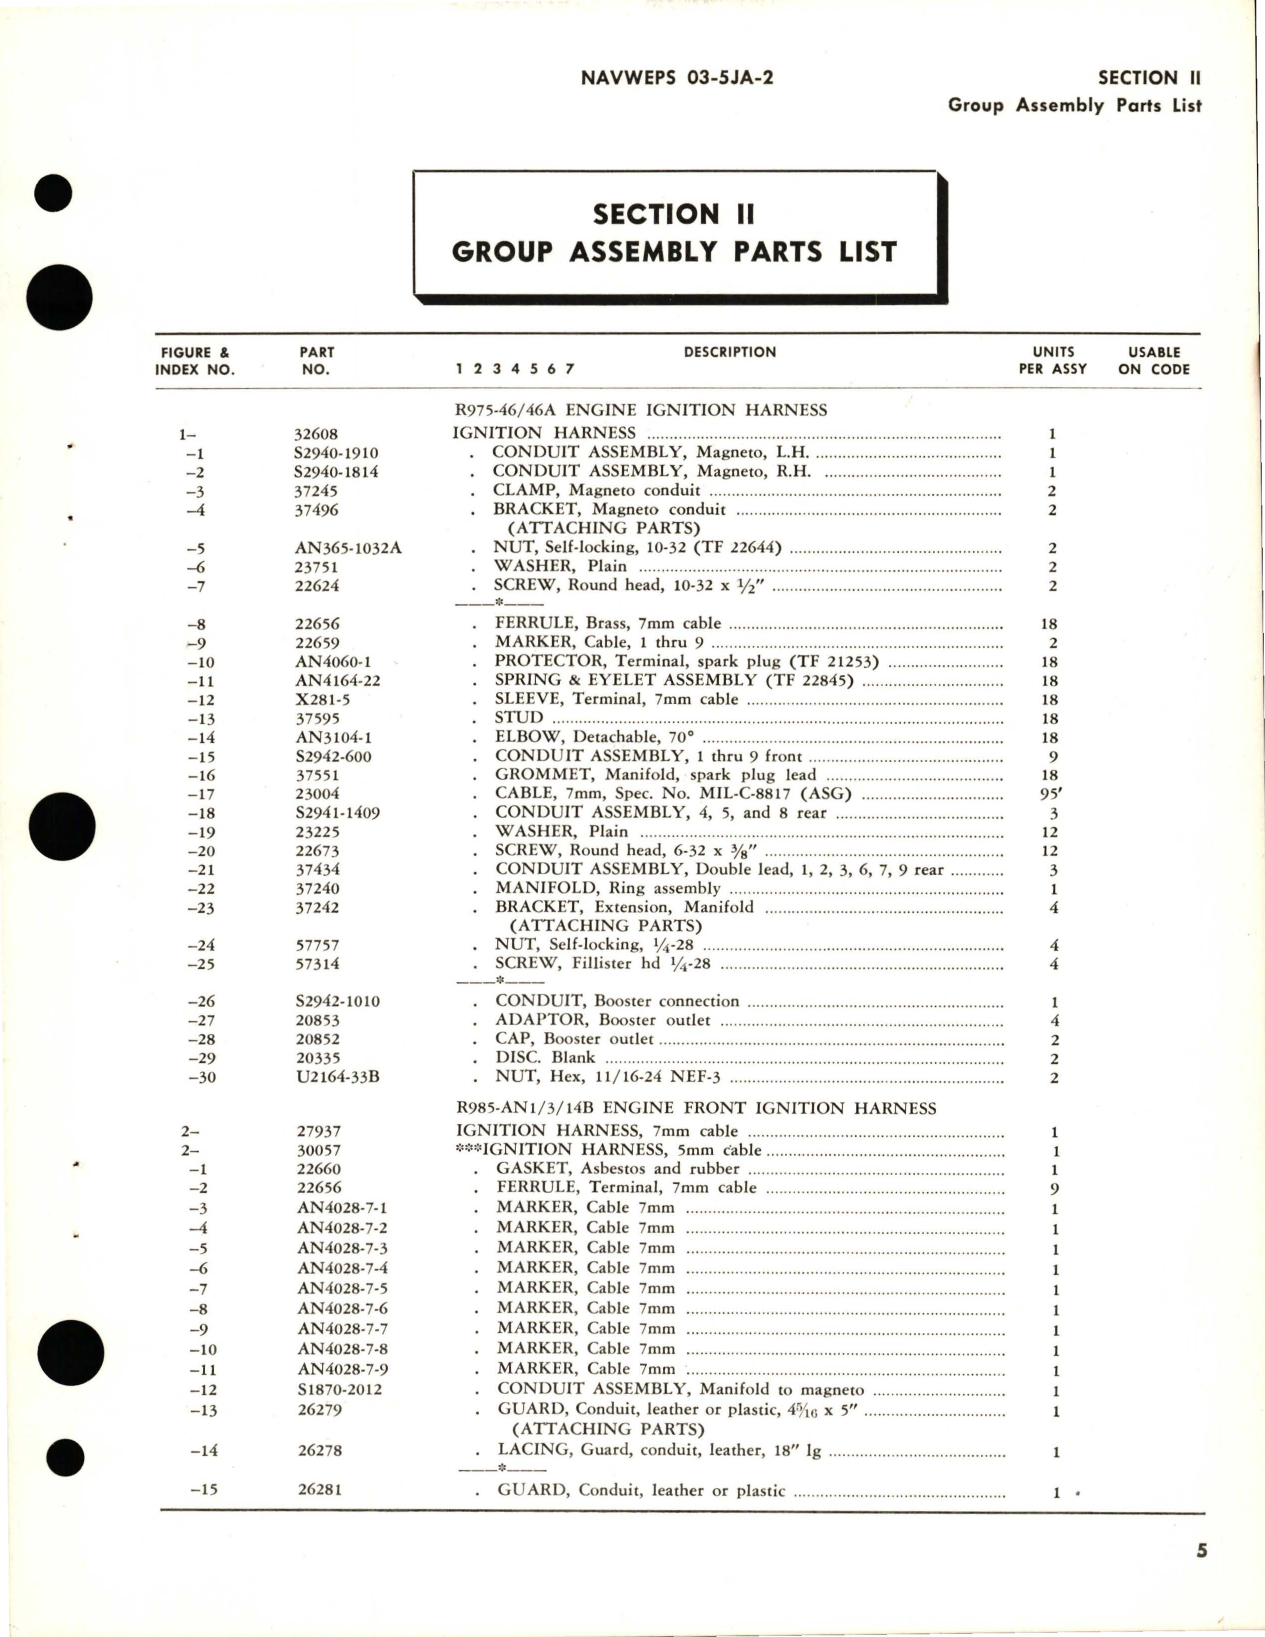 Sample page 9 from AirCorps Library document: Illustrated Parts Breakdown for Shielded Ignition Harnesses and Detachable Spark Plug Leads - Rewirable - 5MM & 7MM Type